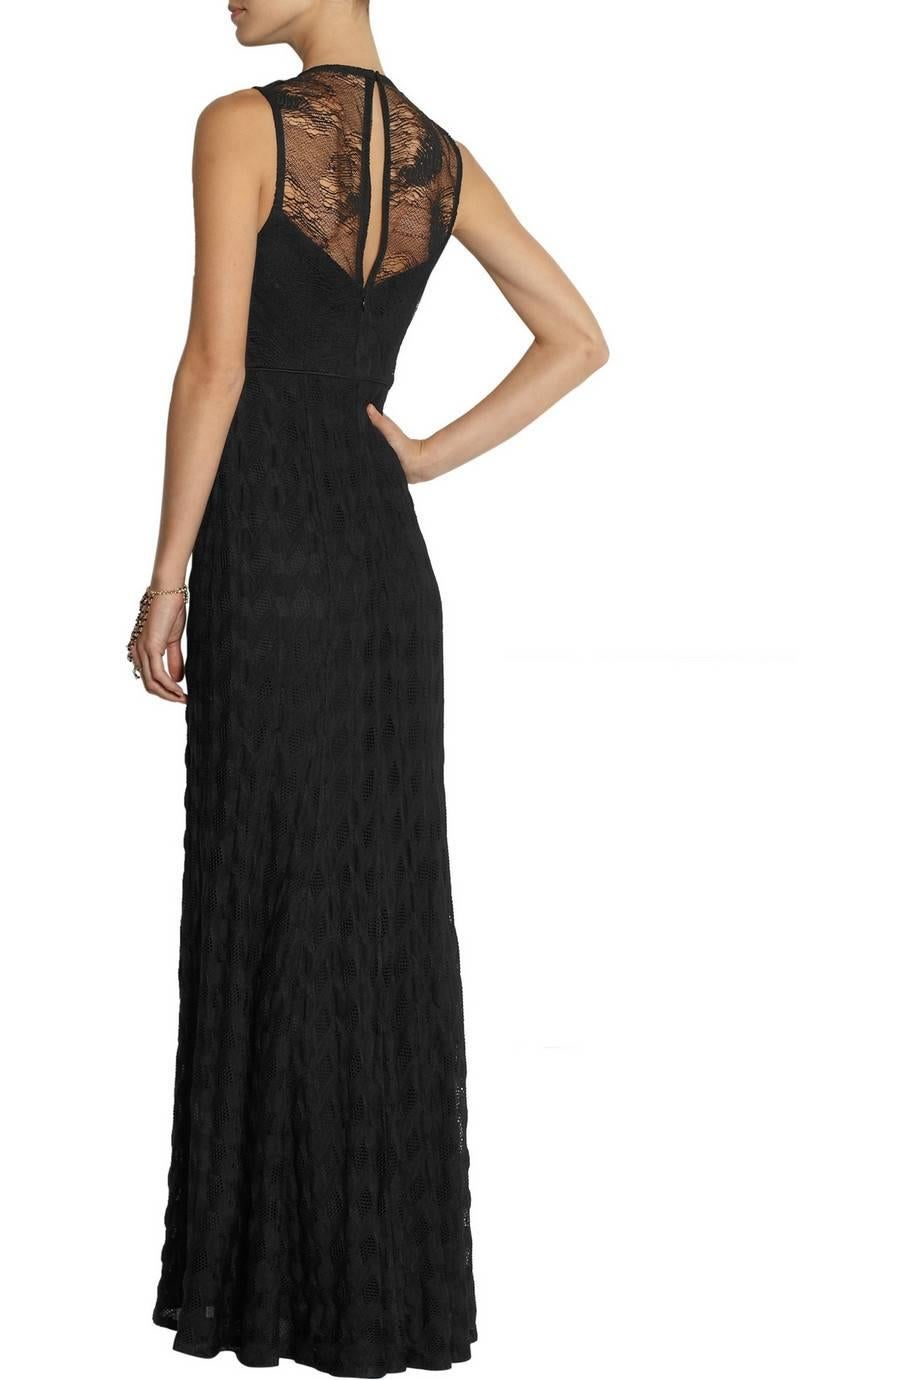 Missoni's black gown has been beautifully crafted in Italy from the label's intricately woven crochet-knit

This stretch silk-lined design features an elegant sheer yoke and satin piping highlighting the smallest part of your waist.

Complement the